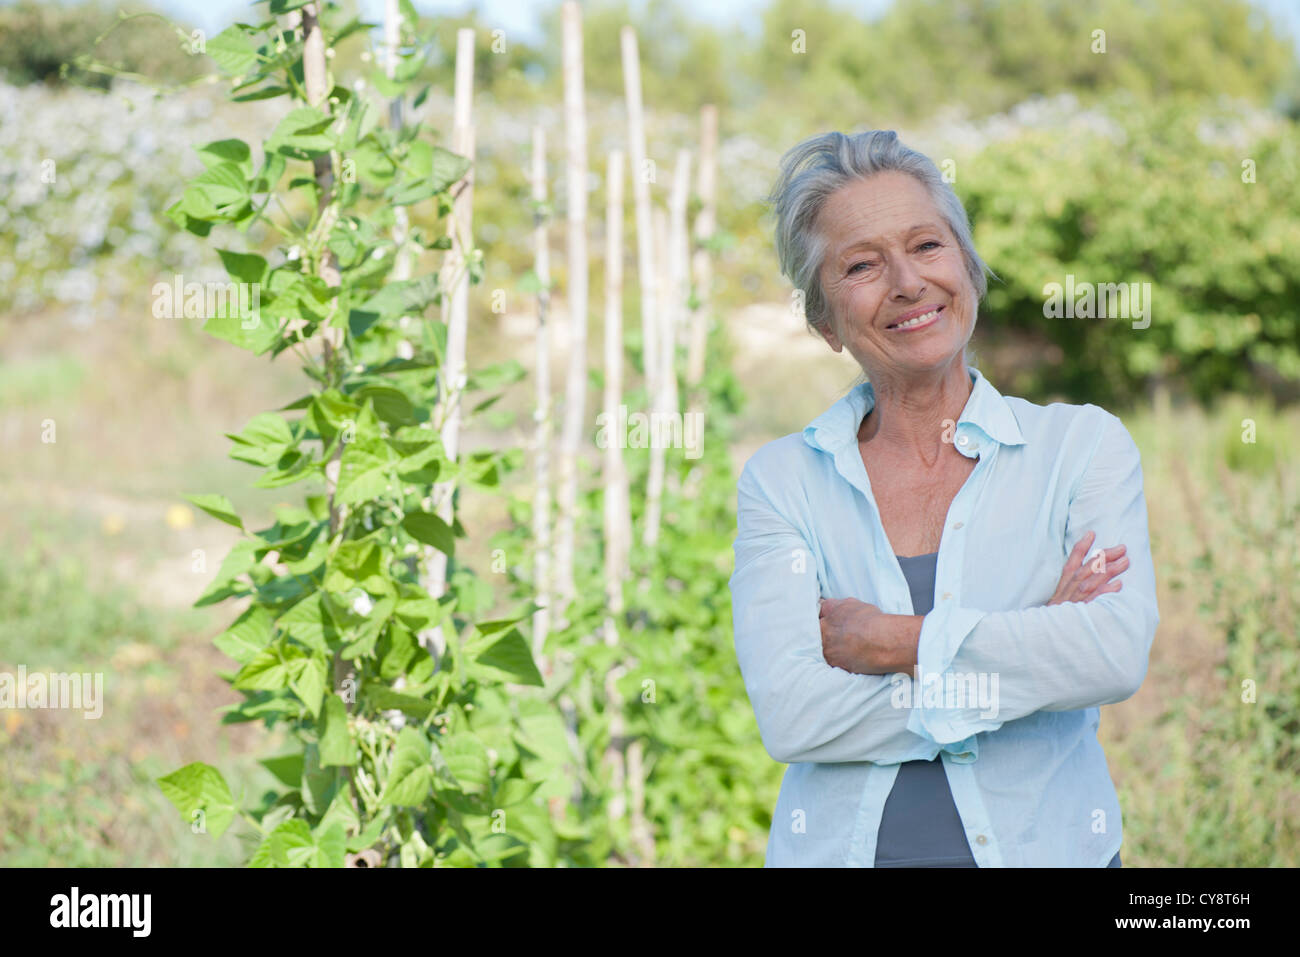 Senior woman smiling proudly in vegetable garden Banque D'Images